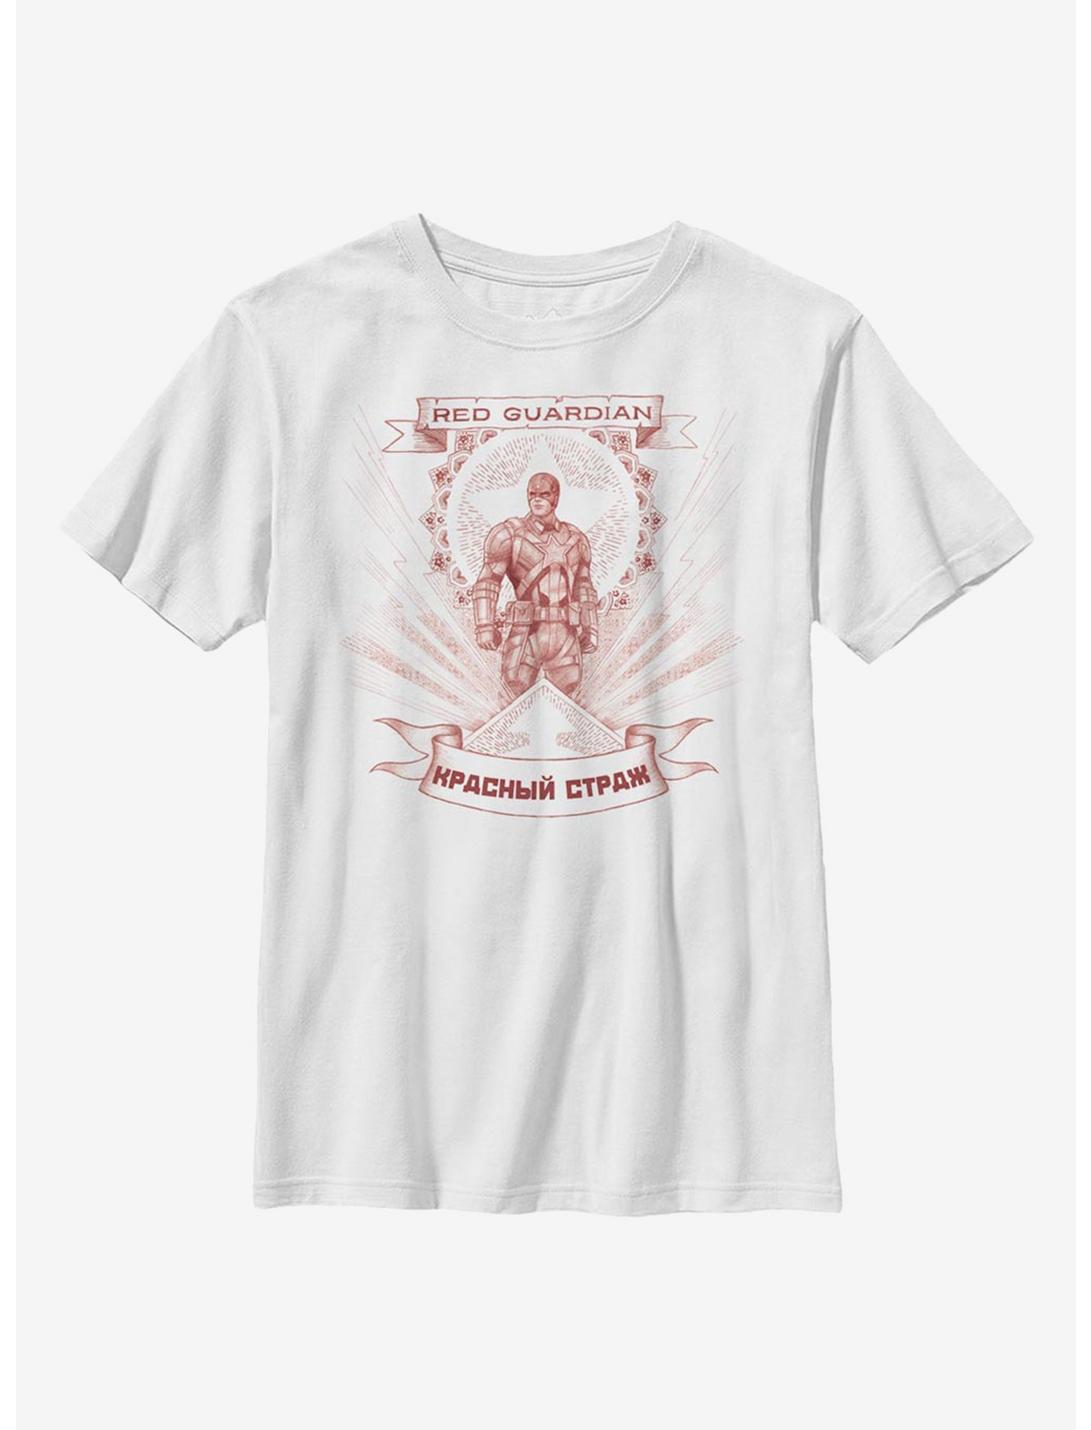 Marvel Black Widow Guardian Of Red Youth T-Shirt, WHITE, hi-res